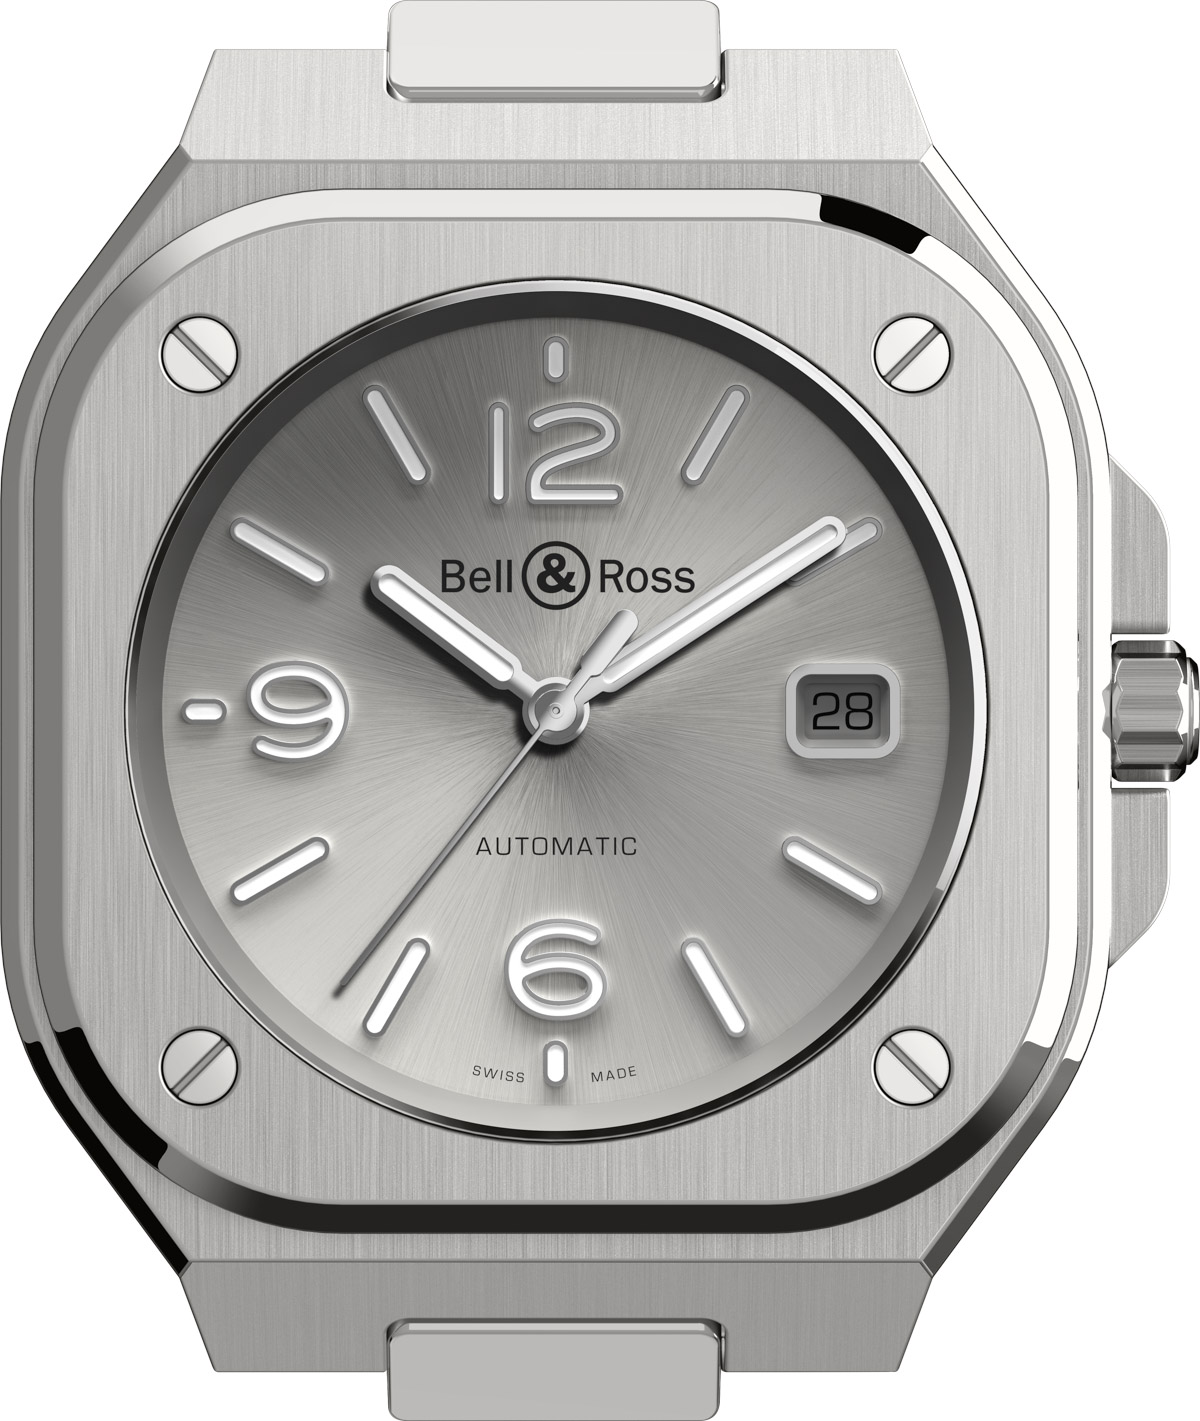 Bell & Ross Celebrates Its Top Three Watches Of 2019 Watch Buying 